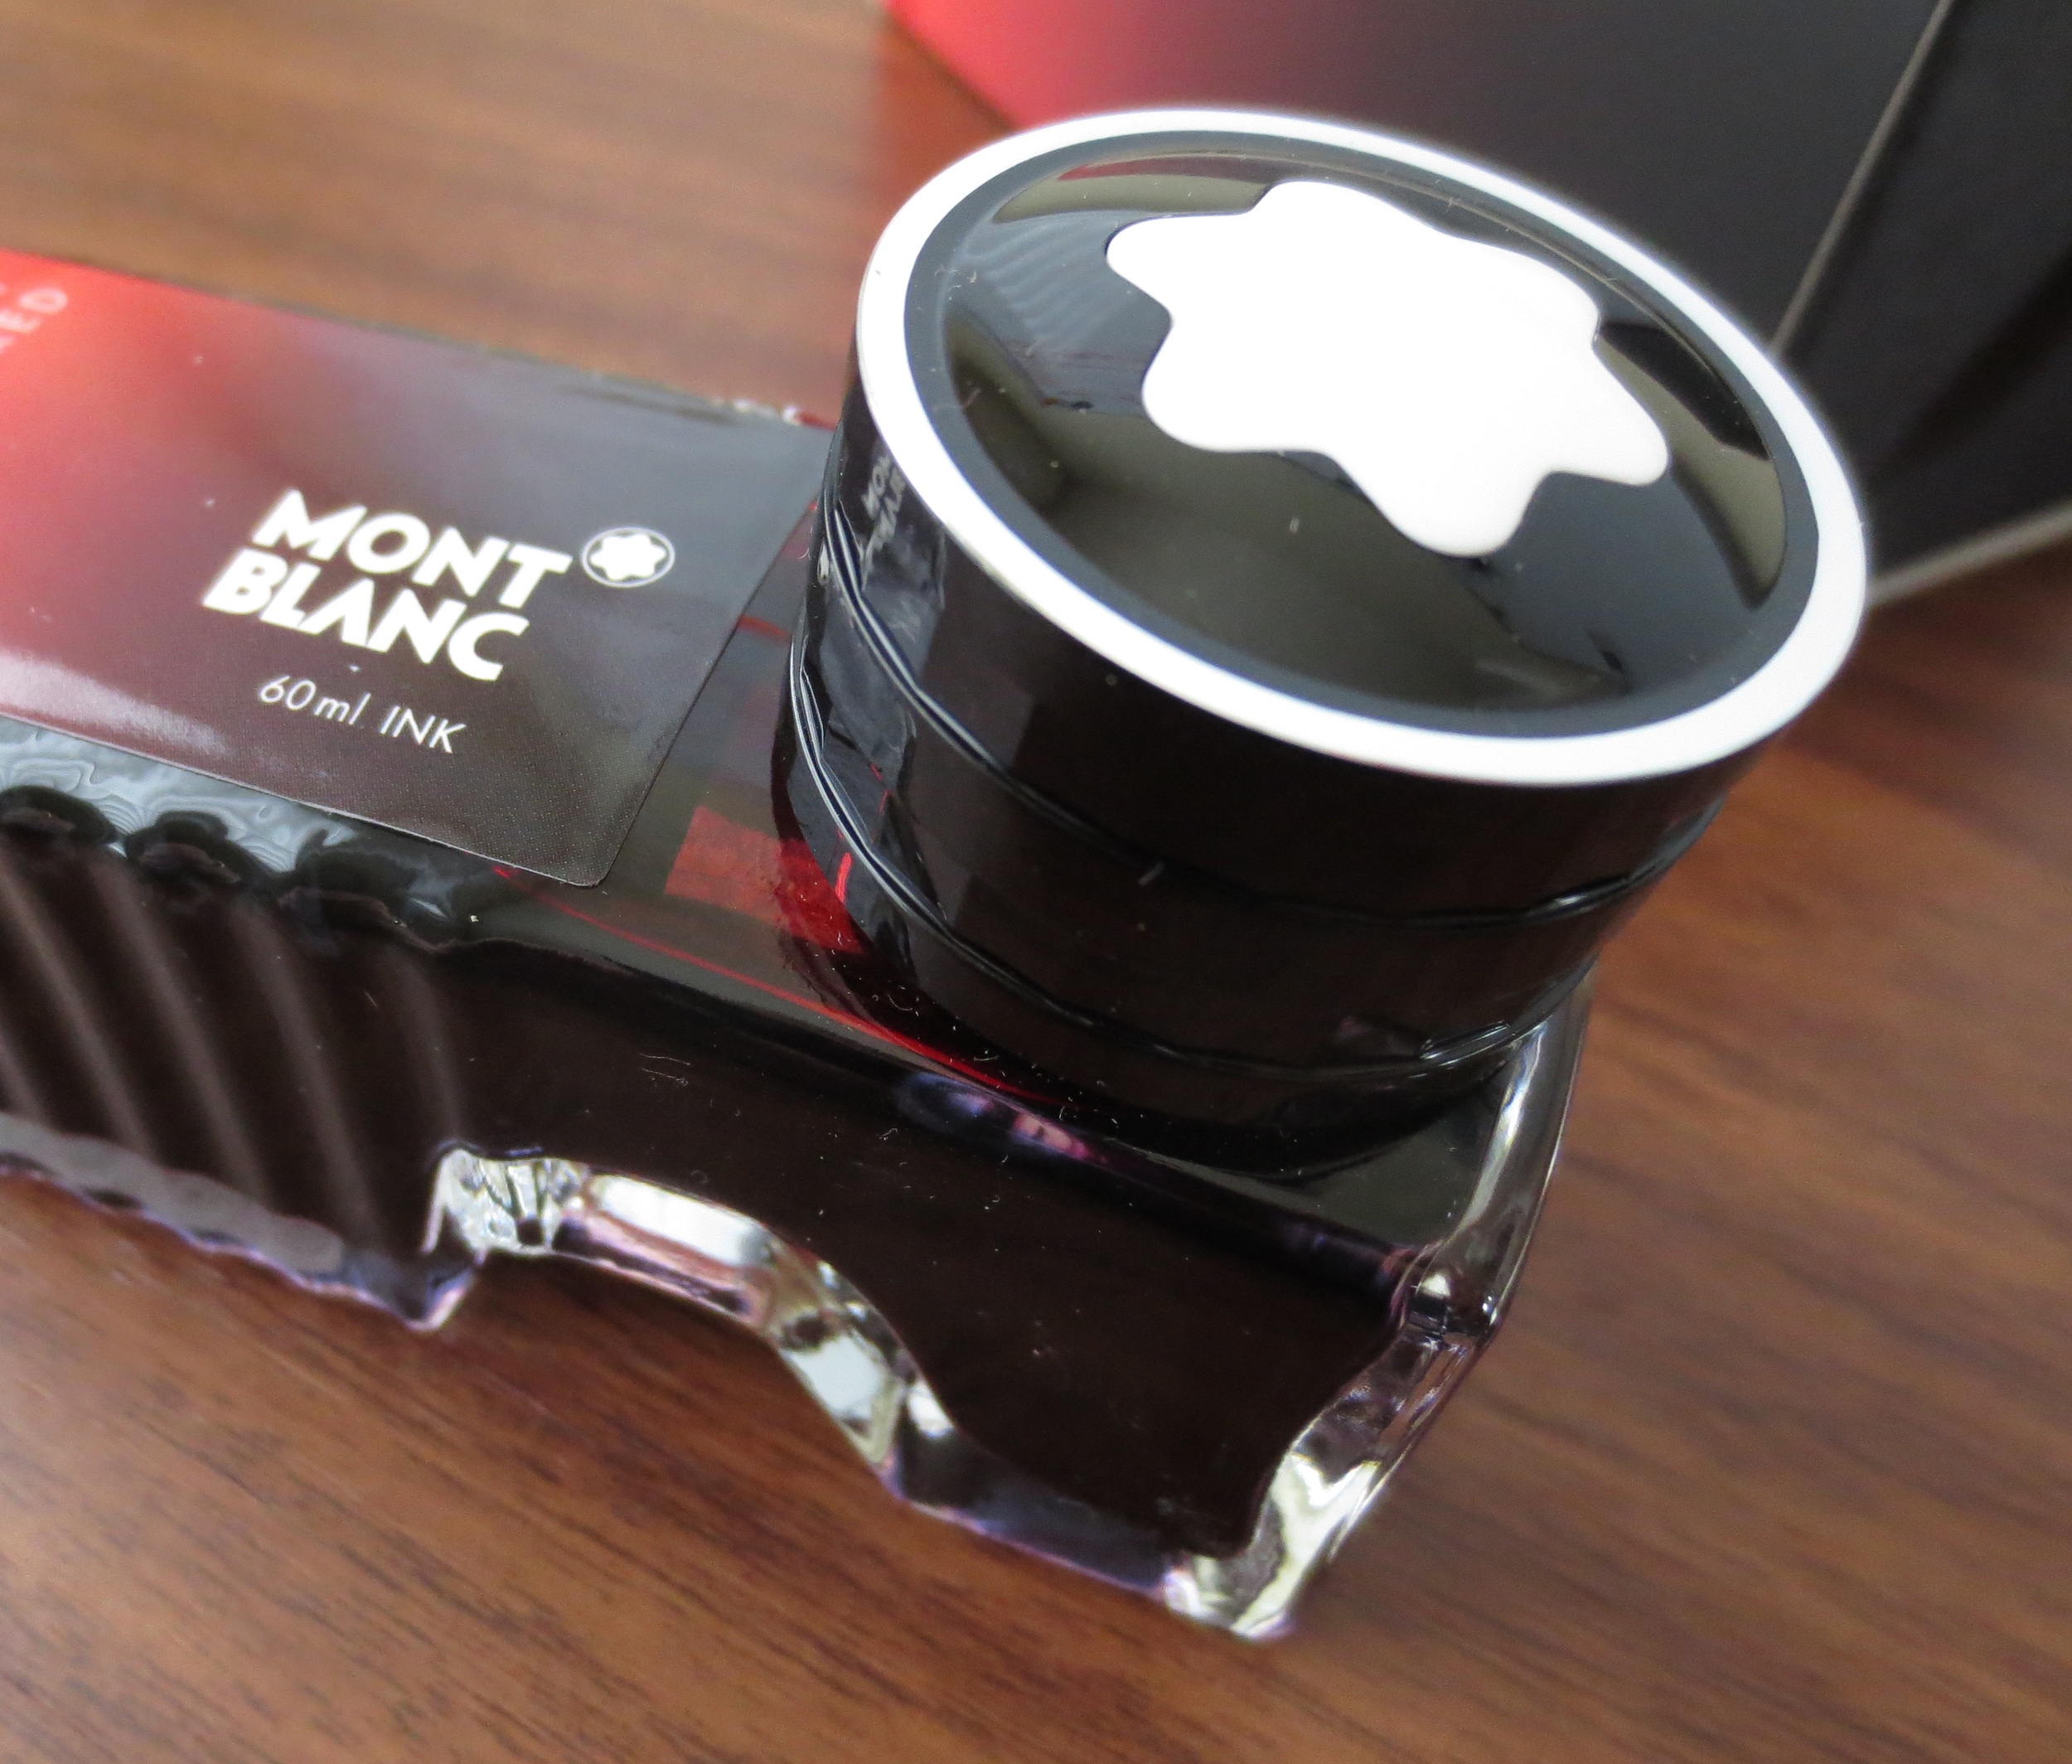 The Silent Cartographer: Montblanc Toffee Brown Ink Review